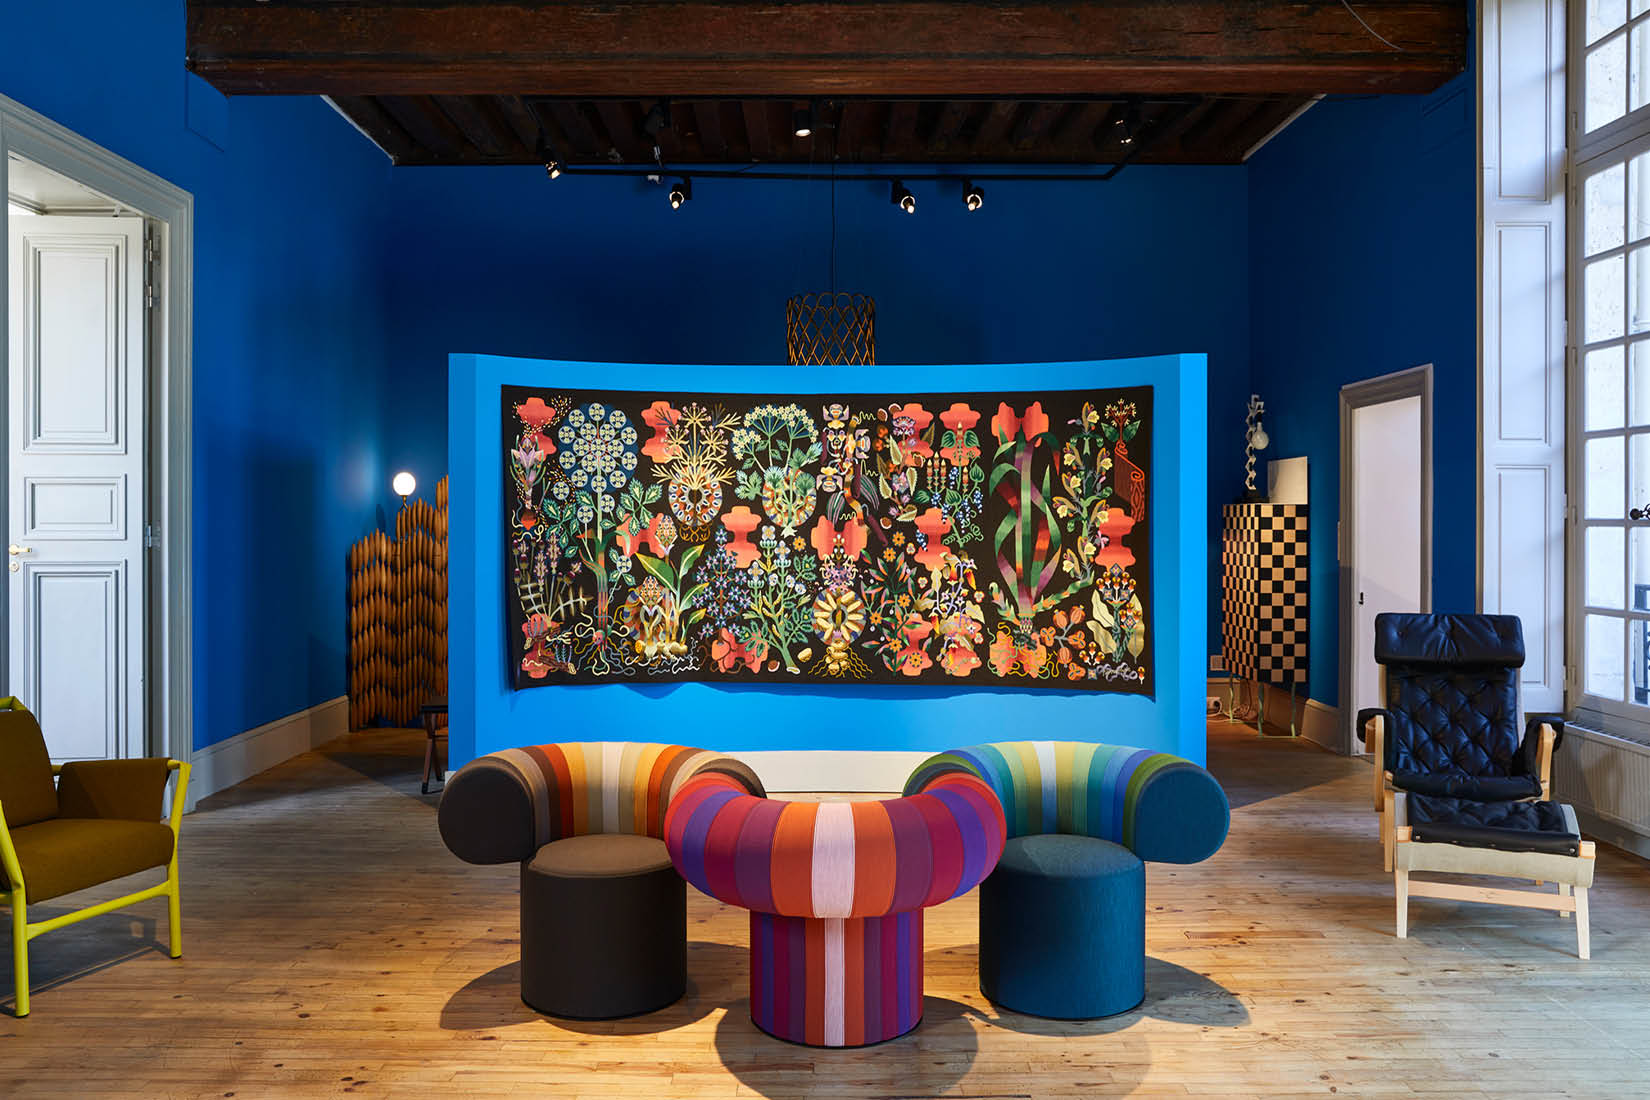 Exhibition of Pierre Marie's Ras El Hanout tapestry with, in the foreground, three colourful armchairs by Blå Station.